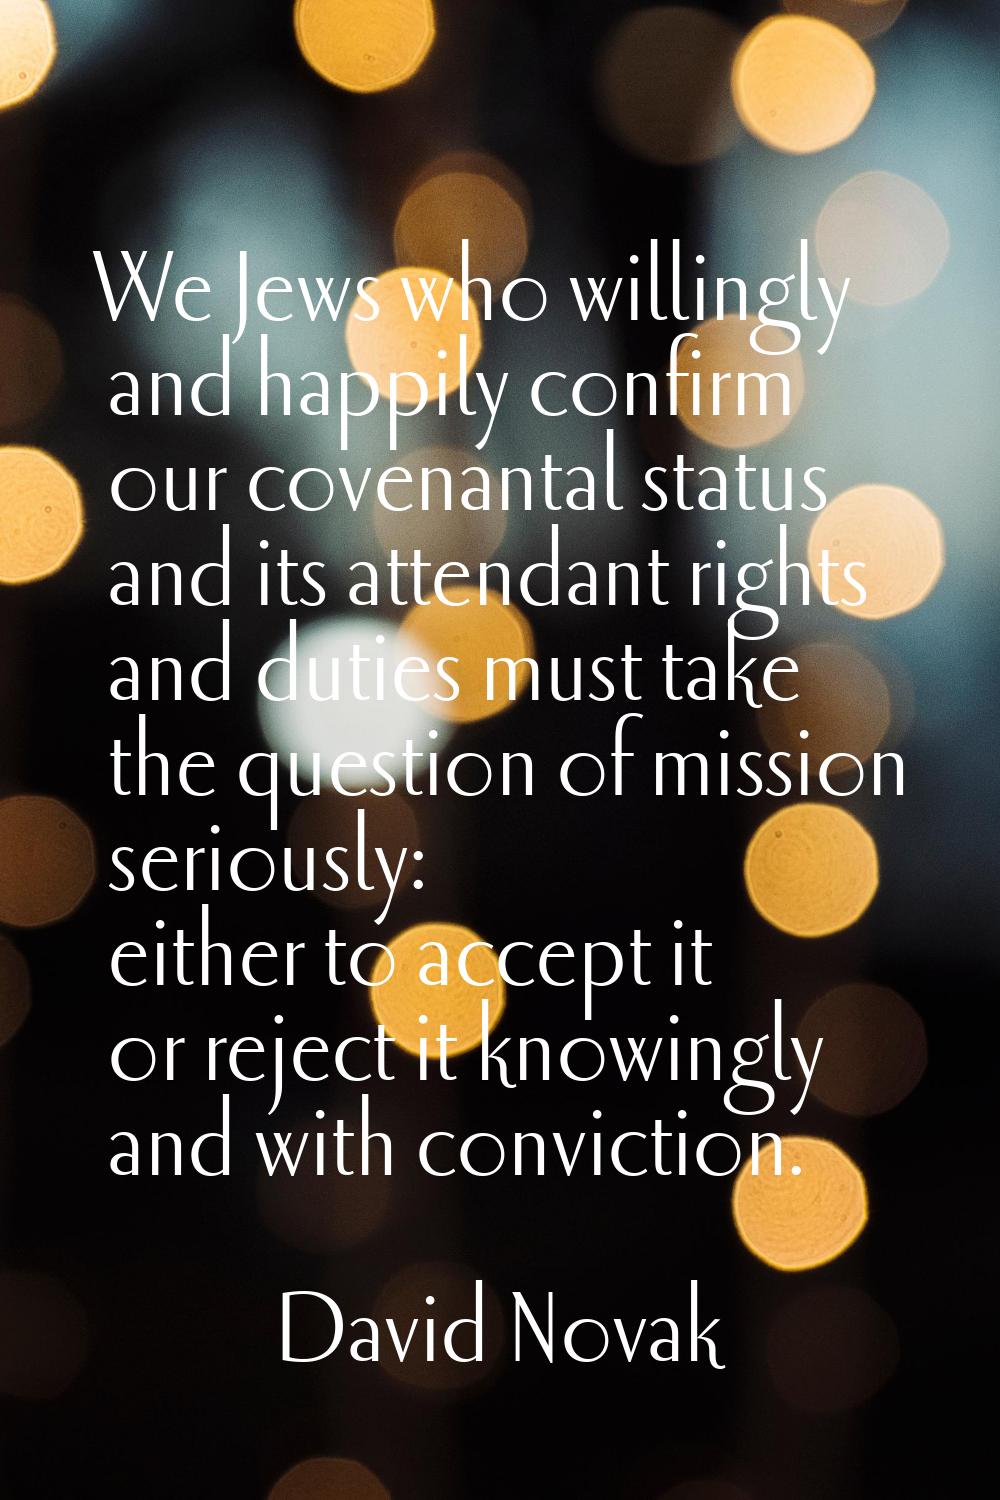 We Jews who willingly and happily confirm our covenantal status and its attendant rights and duties